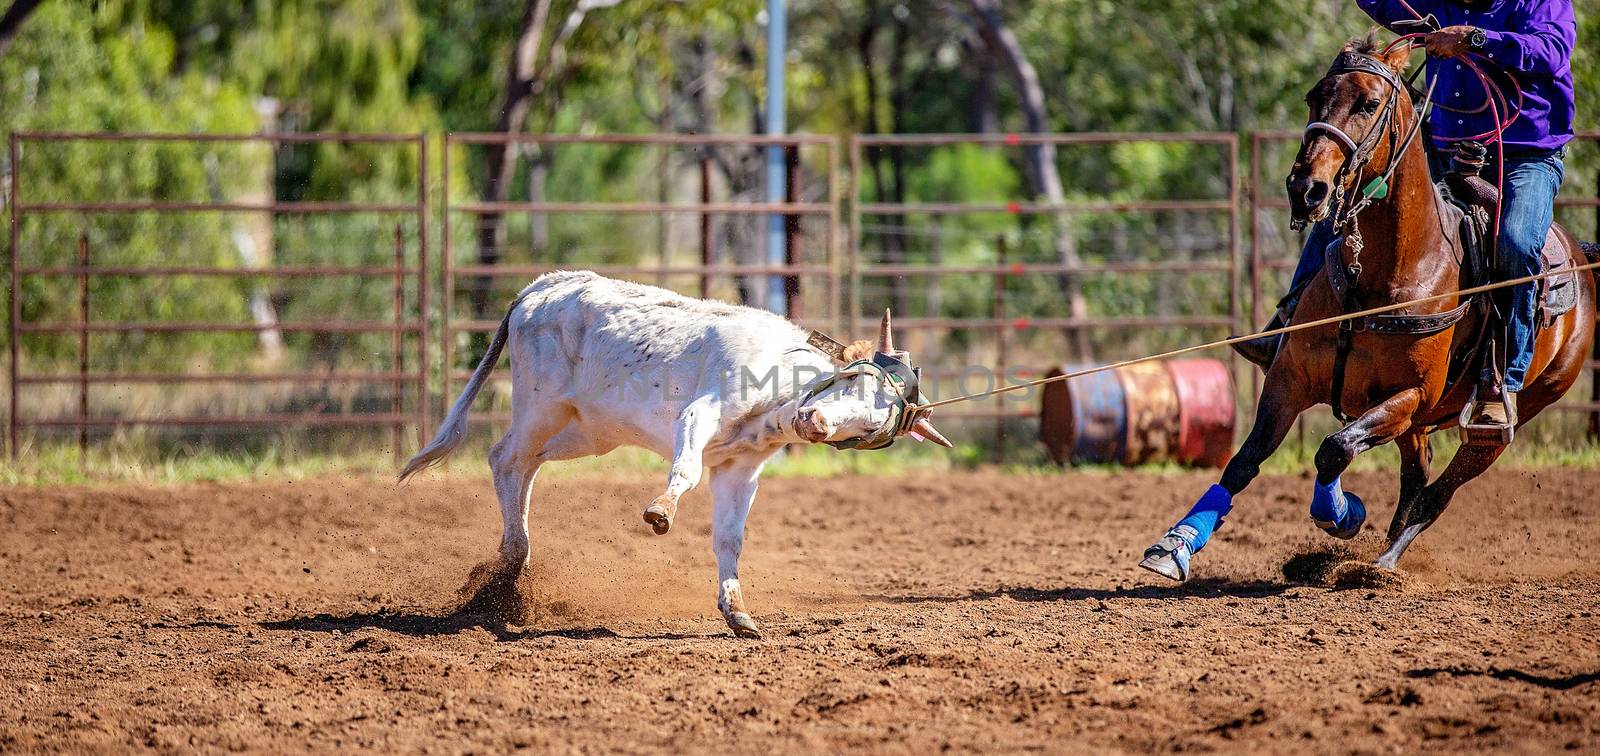 Calf Roping At Australian Country Rodeo by 	JacksonStock